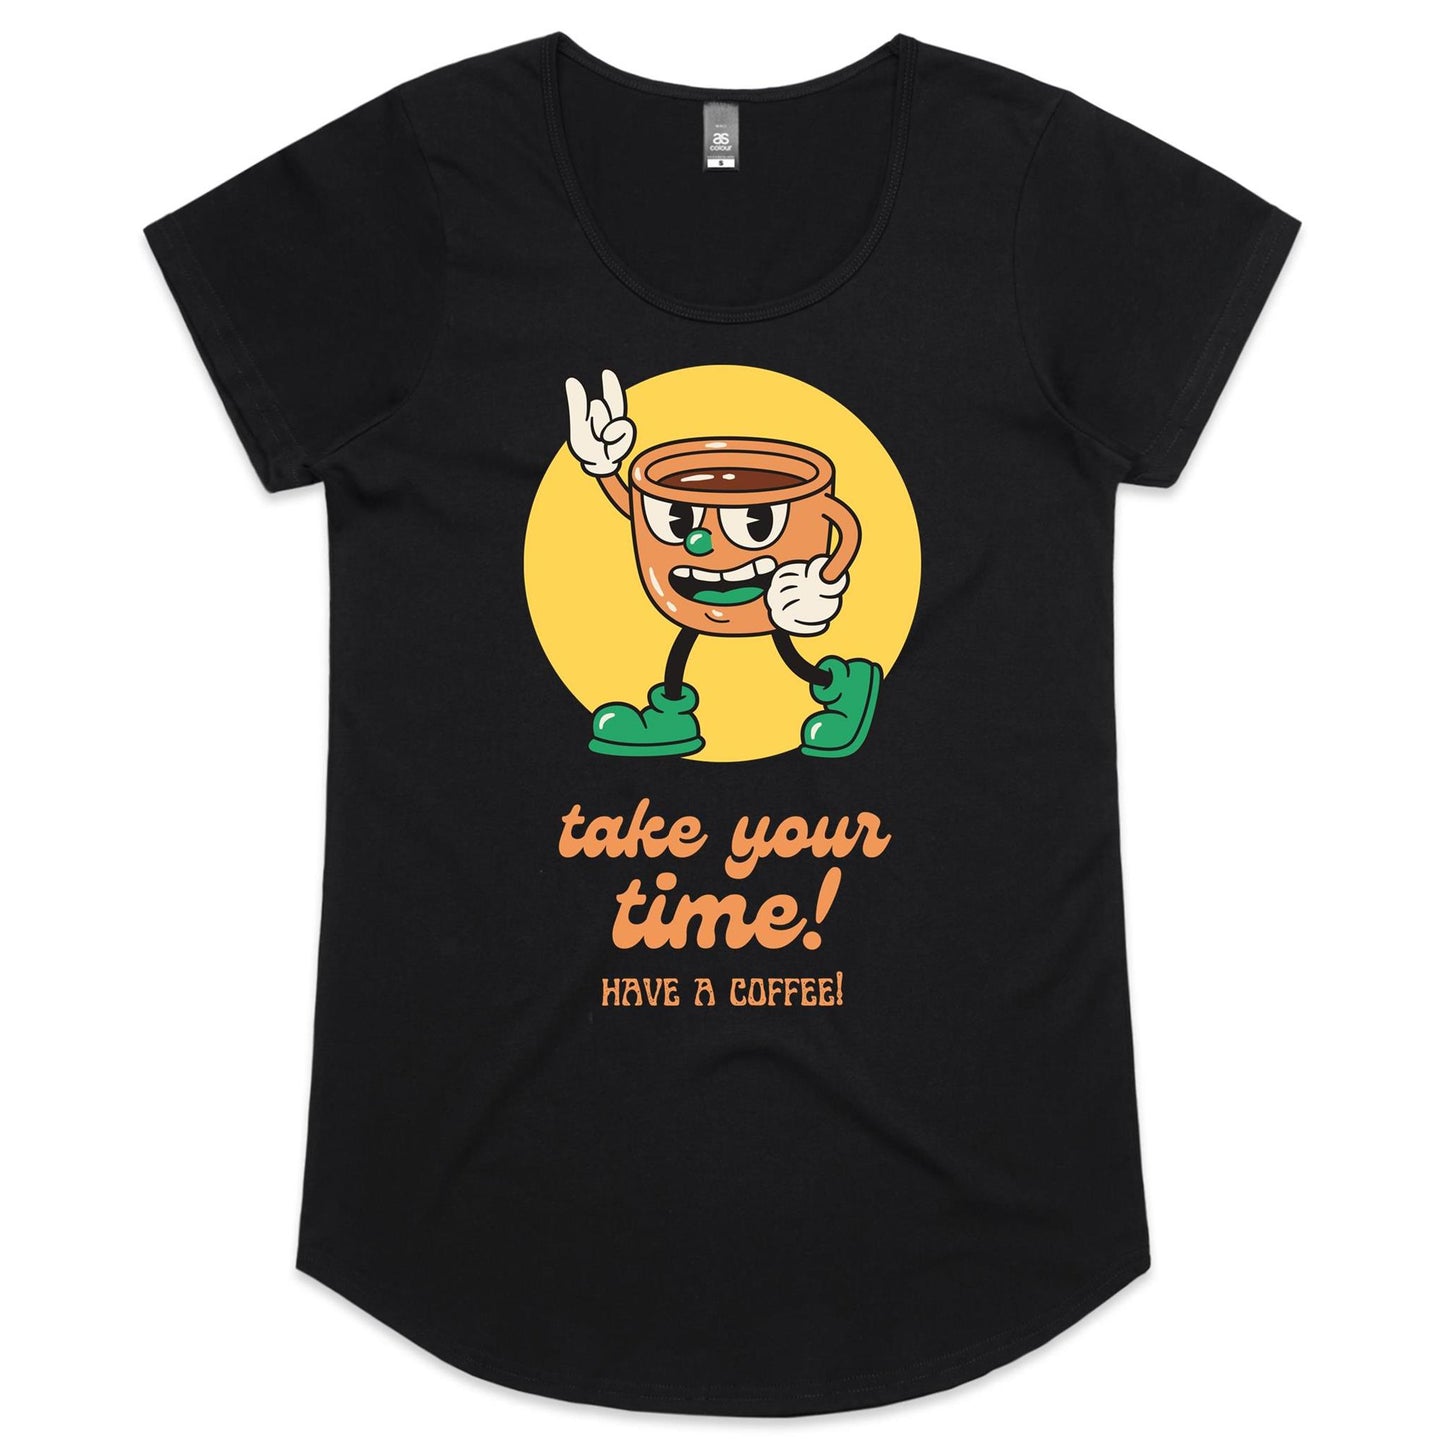 Take Your Time, Have A Coffee - Womens Scoop Neck T-Shirt Black Womens Scoop Neck T-shirt Coffee